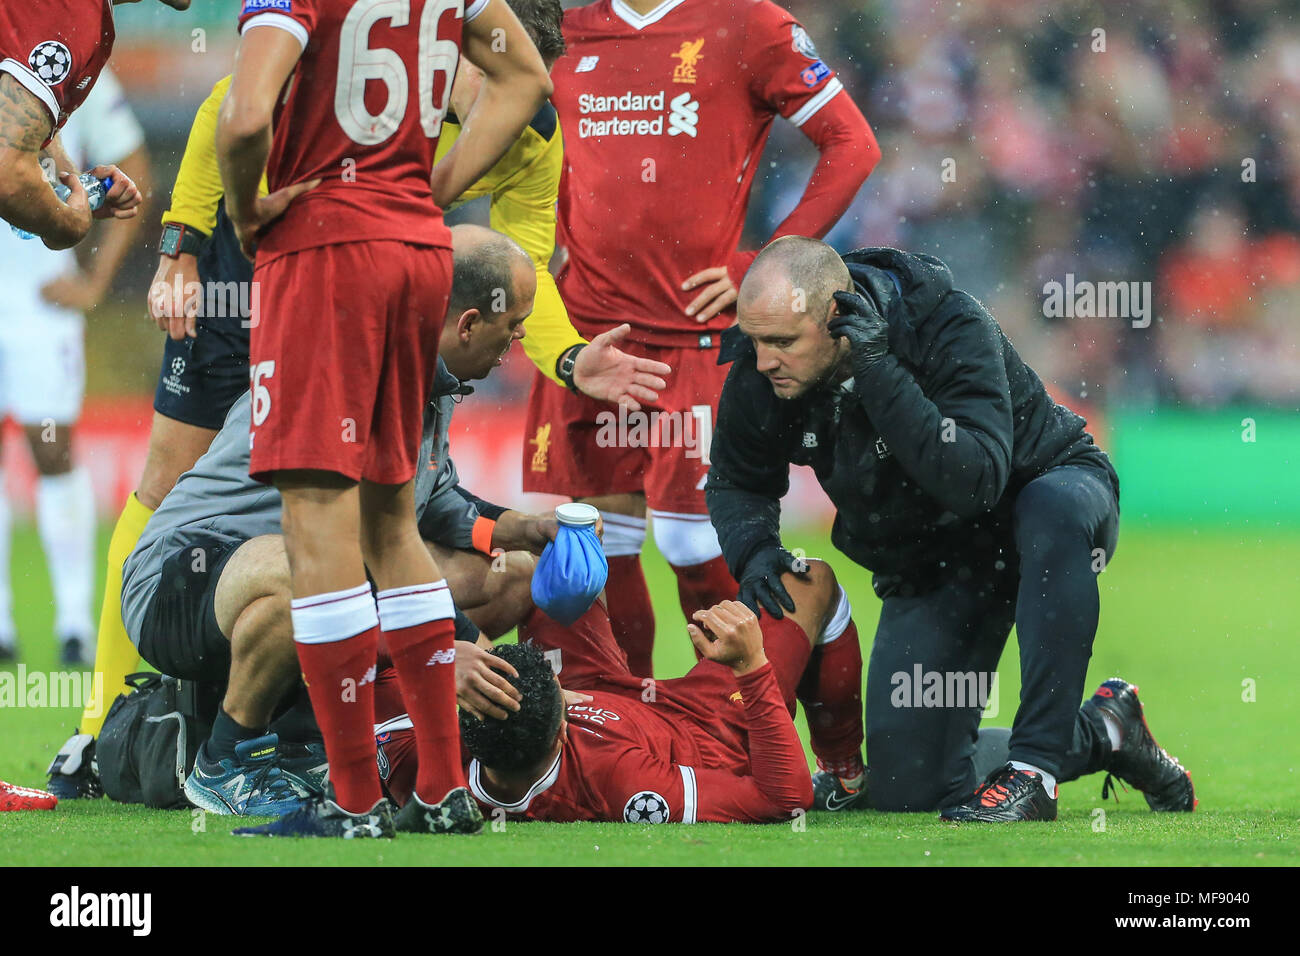 Alex Oxlade-Chamberlain injures his knee after tackling Aleksandar Kolarov of Roma  and is stretchered off during the UAFA Champions League Semi Final, first leg, Liverpool v Roma could this be the end of his season and world cup ? Stock Photo